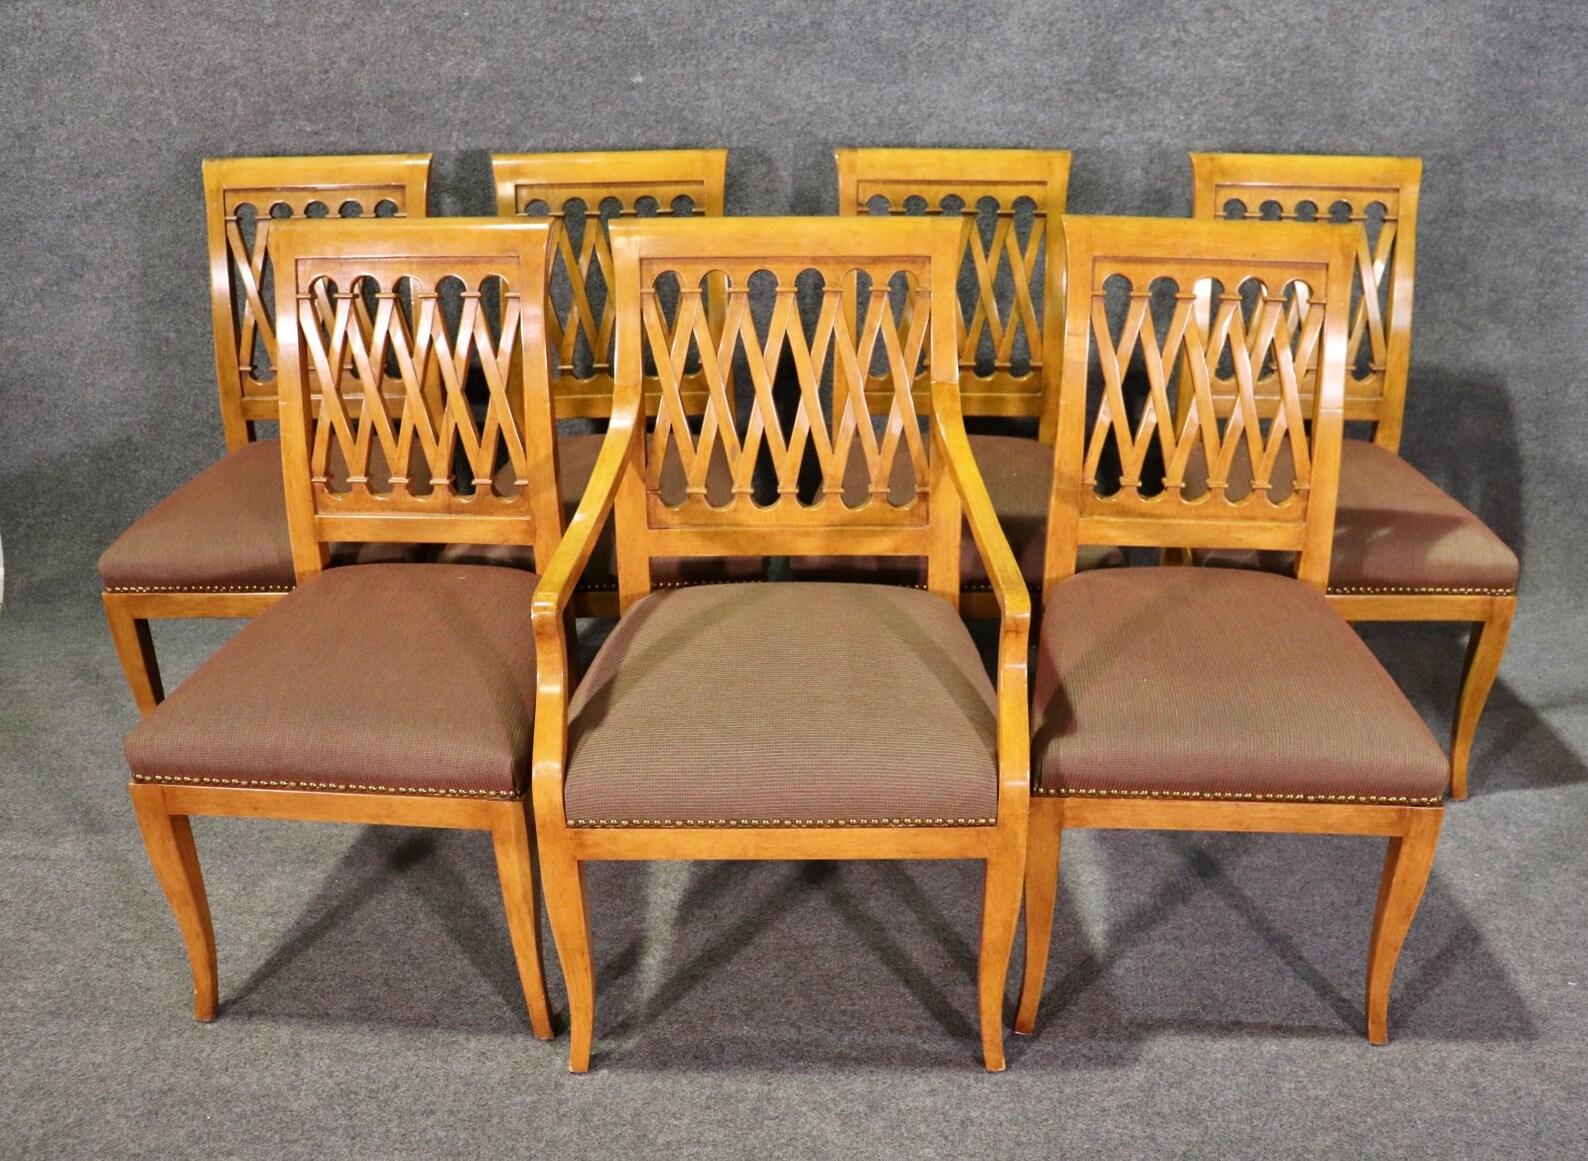 Dimensions: Height: 38 in Width: 20 in Depth: 22 1/2in Seat Height: 18 1/4in

This set of 8 Mid Century Modern Biedermeier style beechwood chairs is of the highest quality! These chairs are perfect for you and your home and will bring a sense of